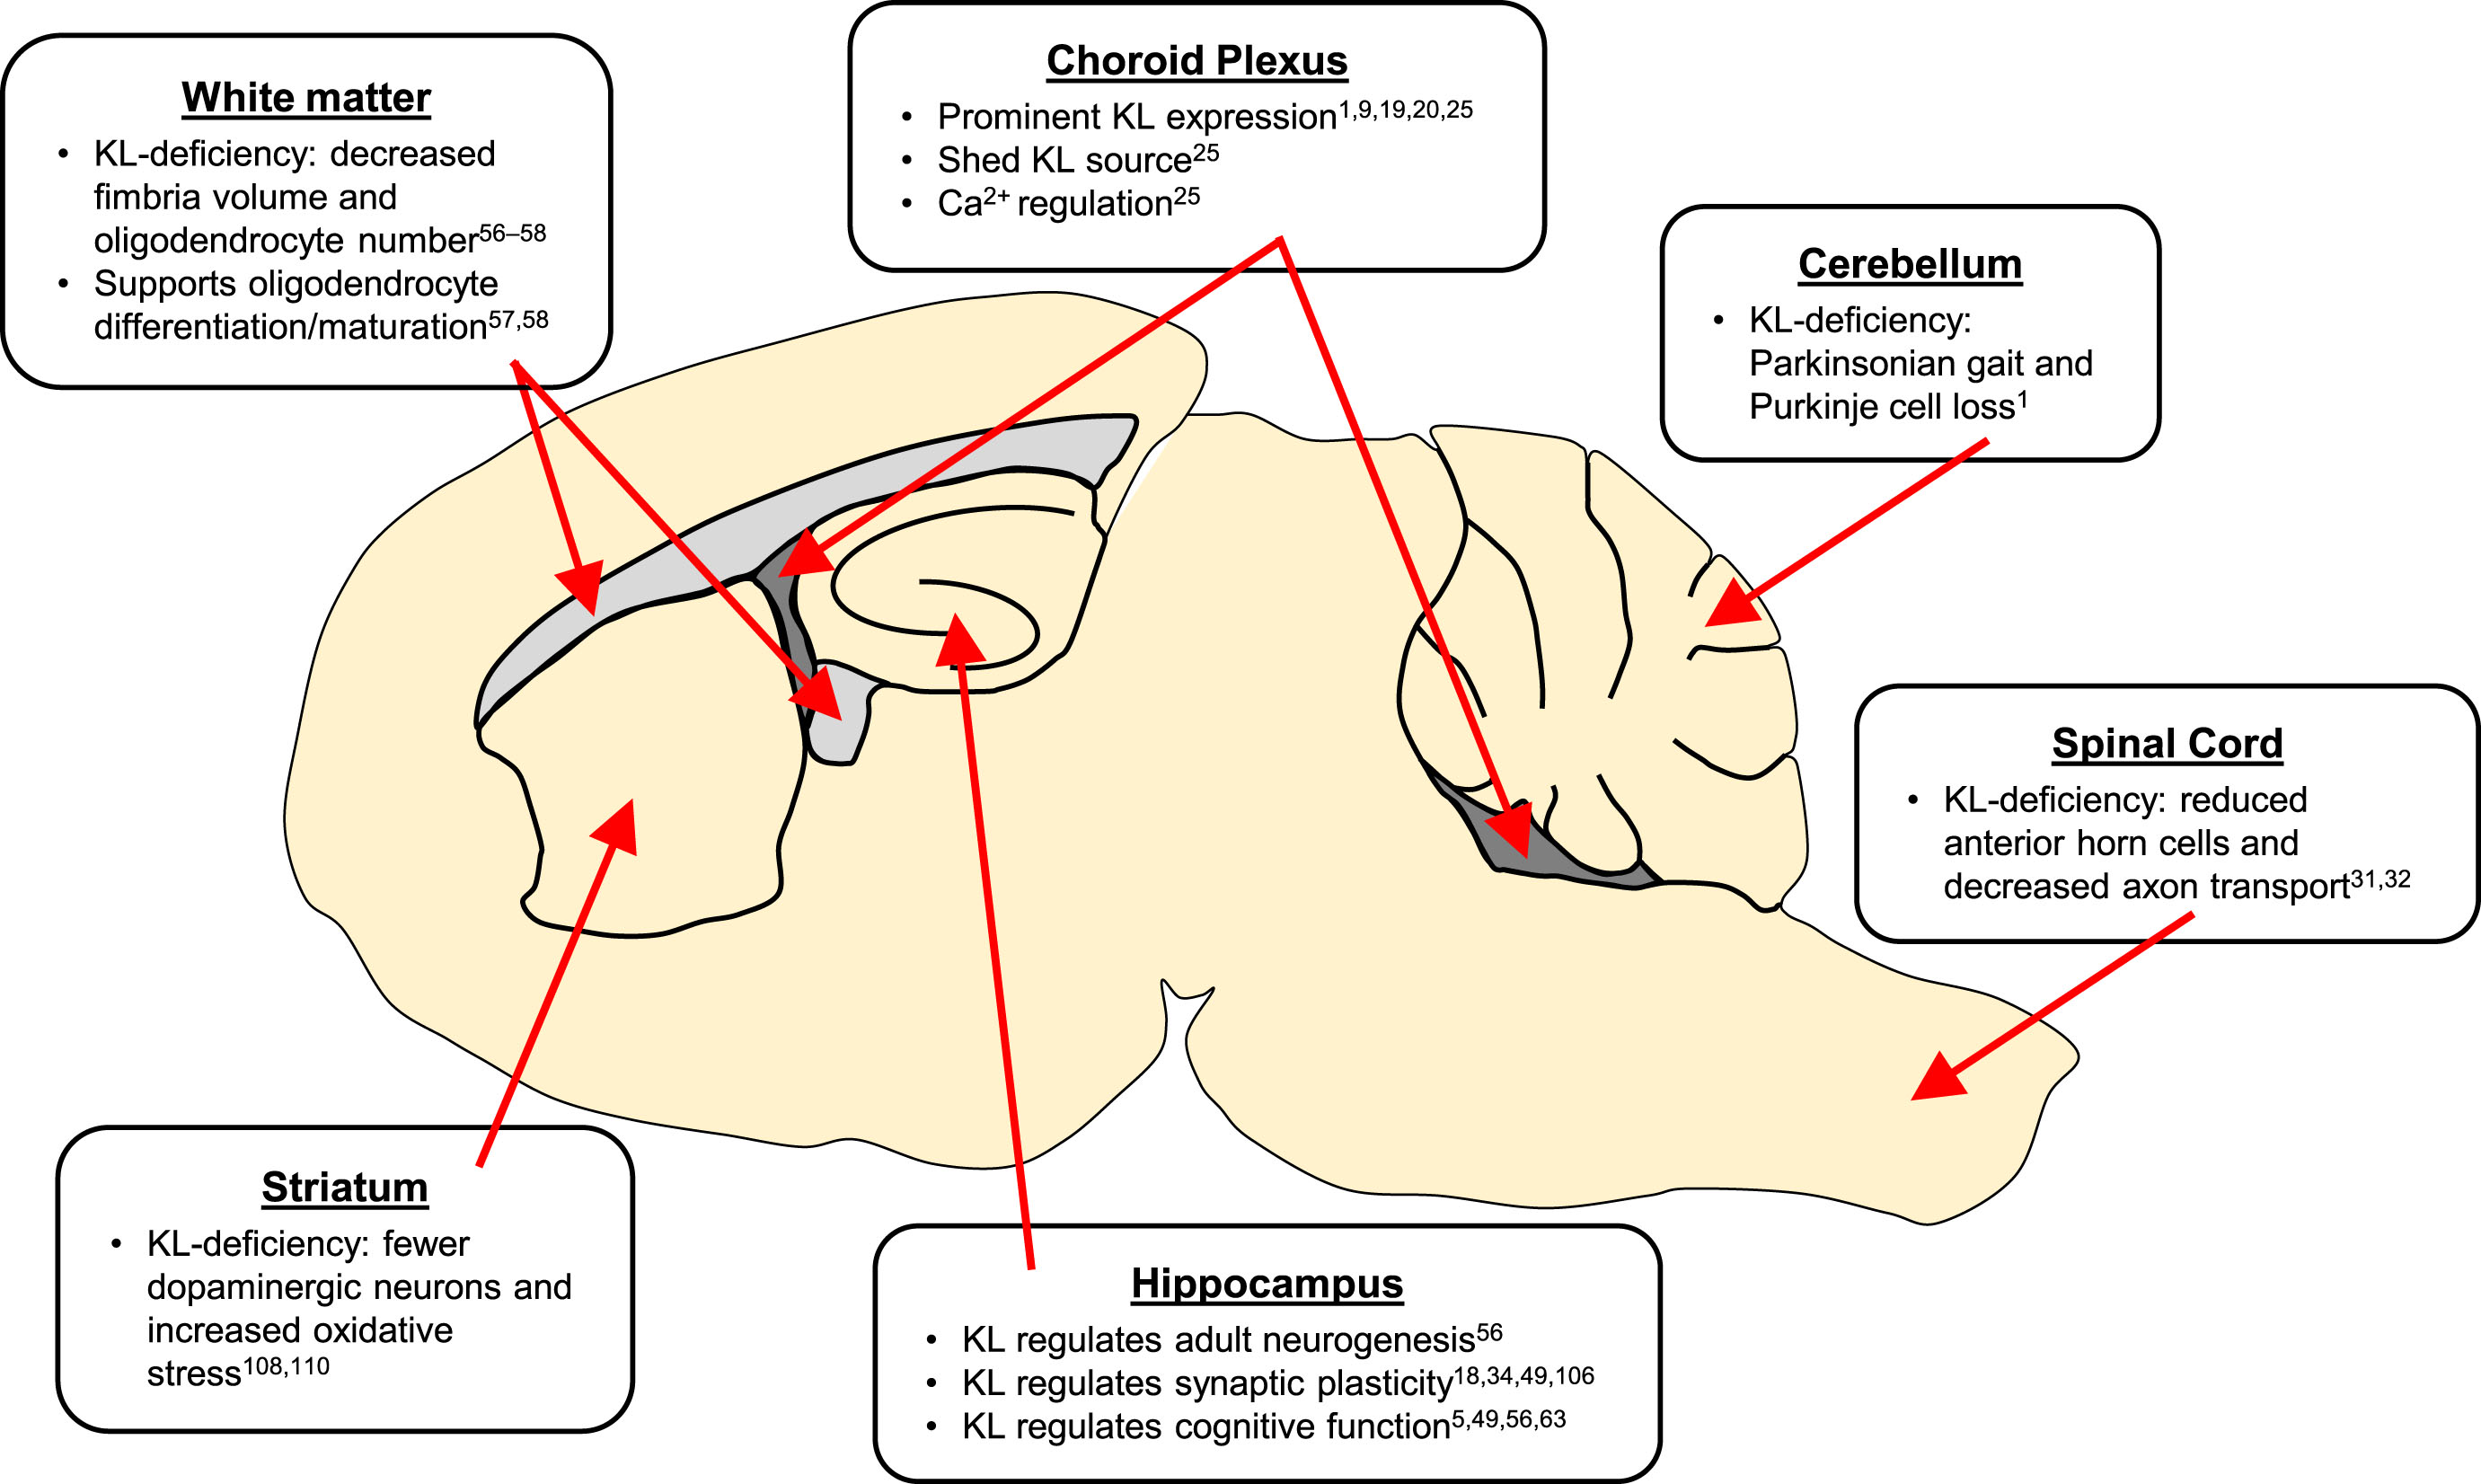 Summary of KL implicated brain regions. KL proteins act throughout neuronal and non-neuronal regions of the brain.